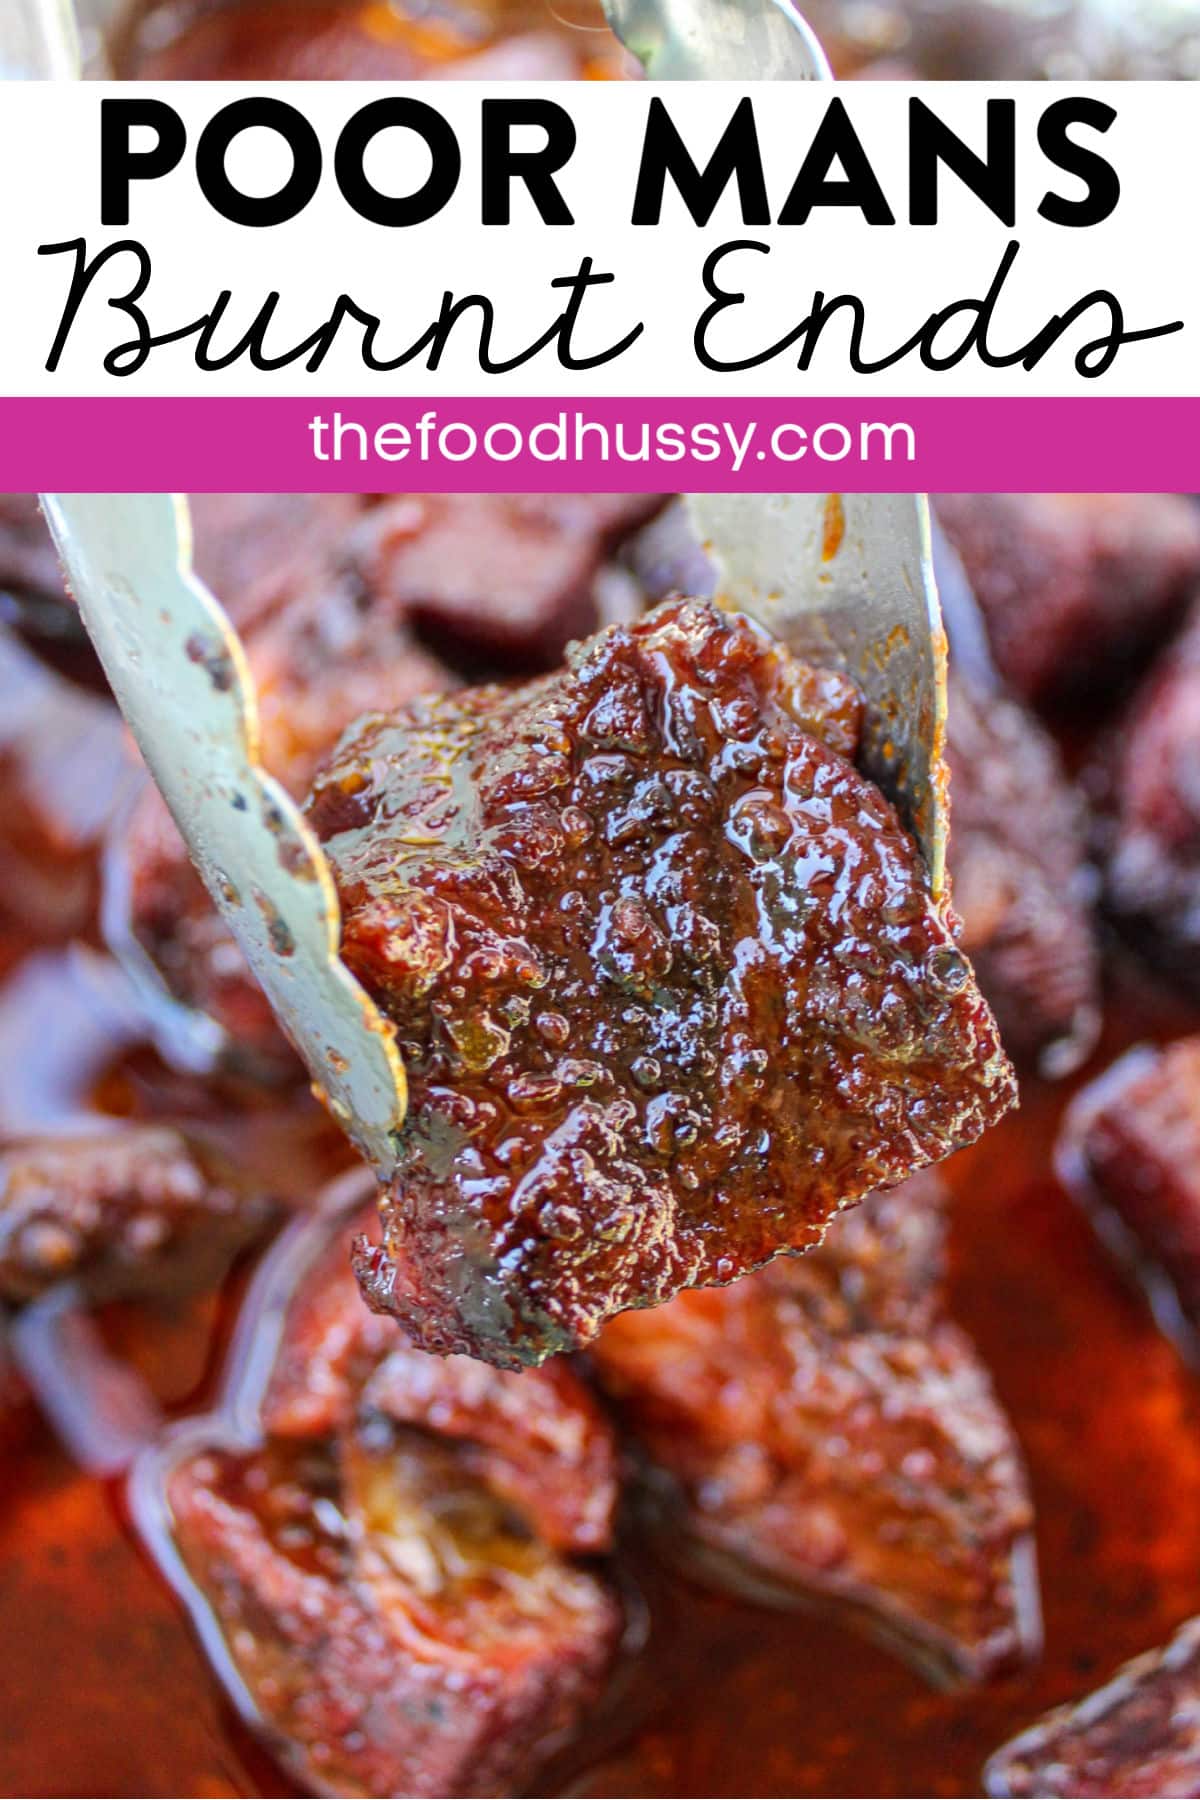 Poor Mans Burnt Ends are a quick way to enjoy deliciously smoked juicy bites of beef - without an overnight smoke! A chuck roast turns into smoky tender pieces that melt in your mouth! via @foodhussy